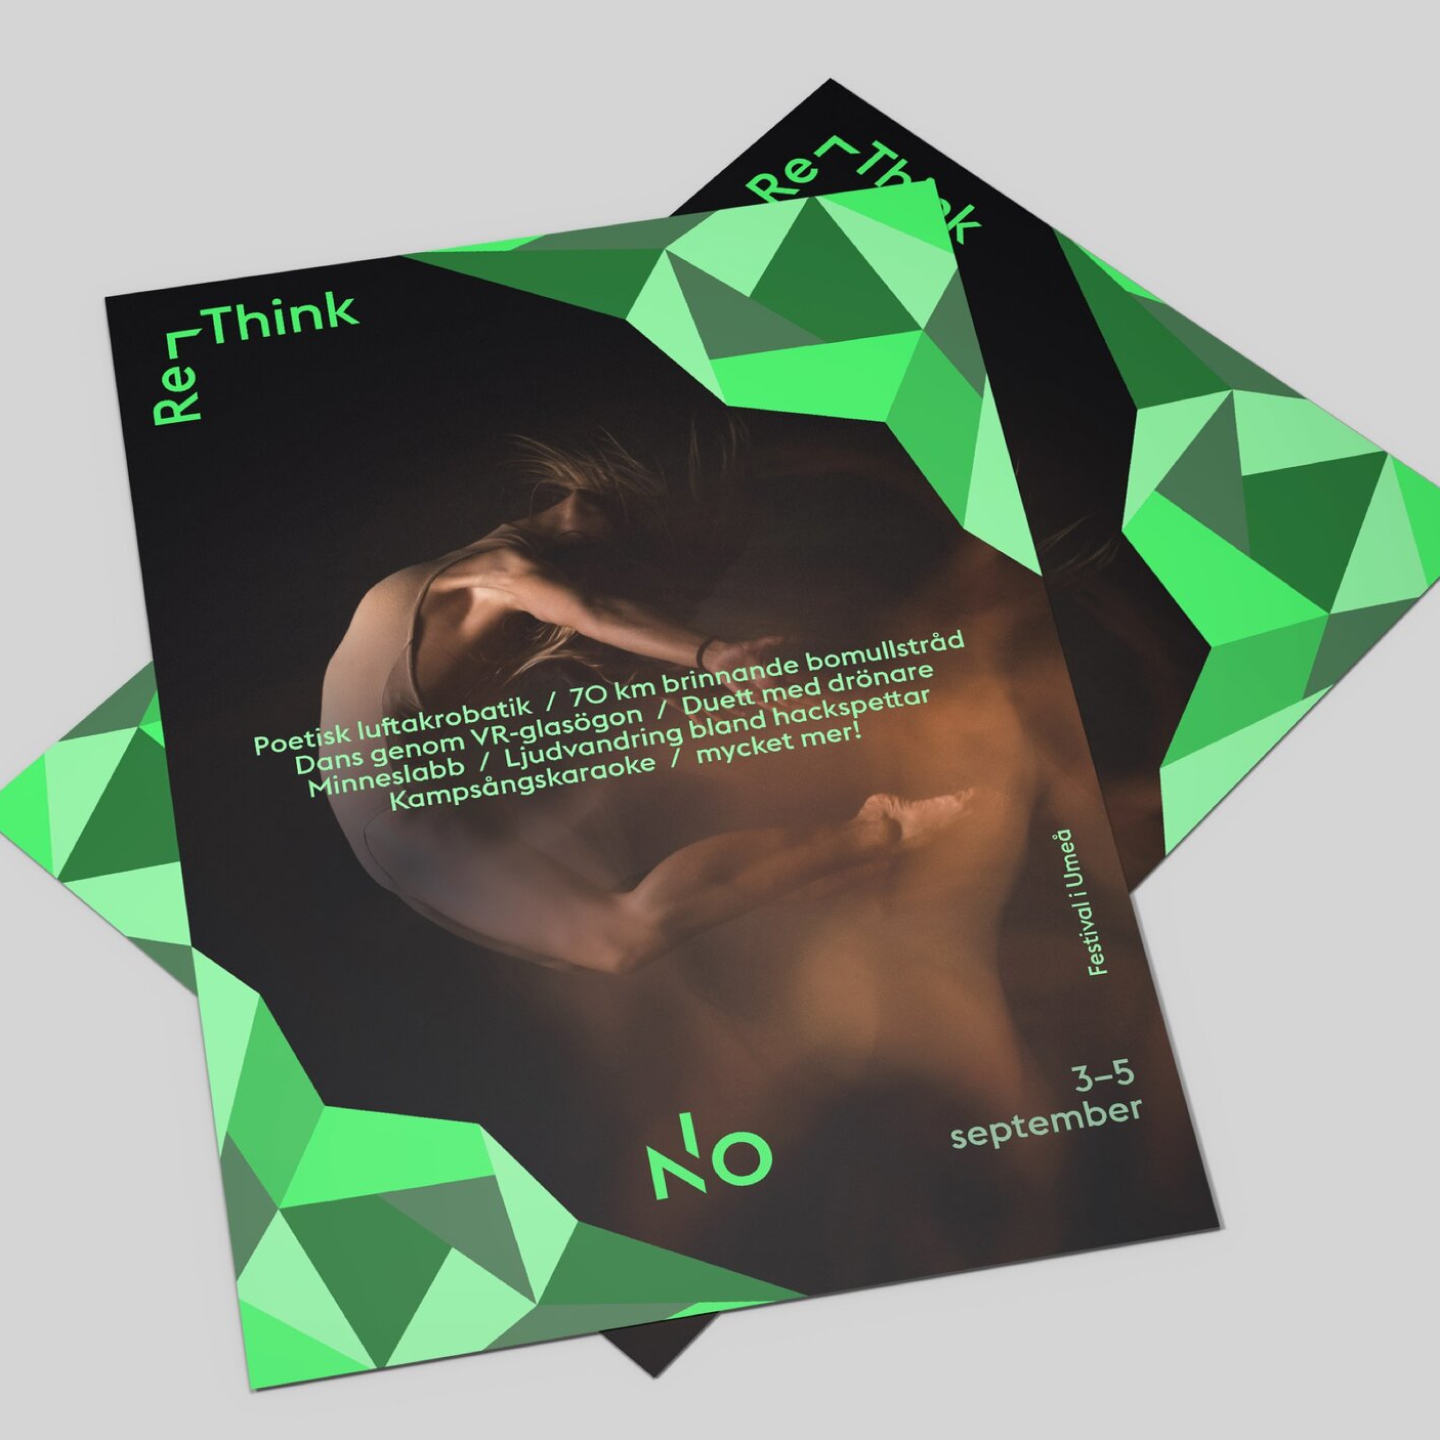 04.Re-think